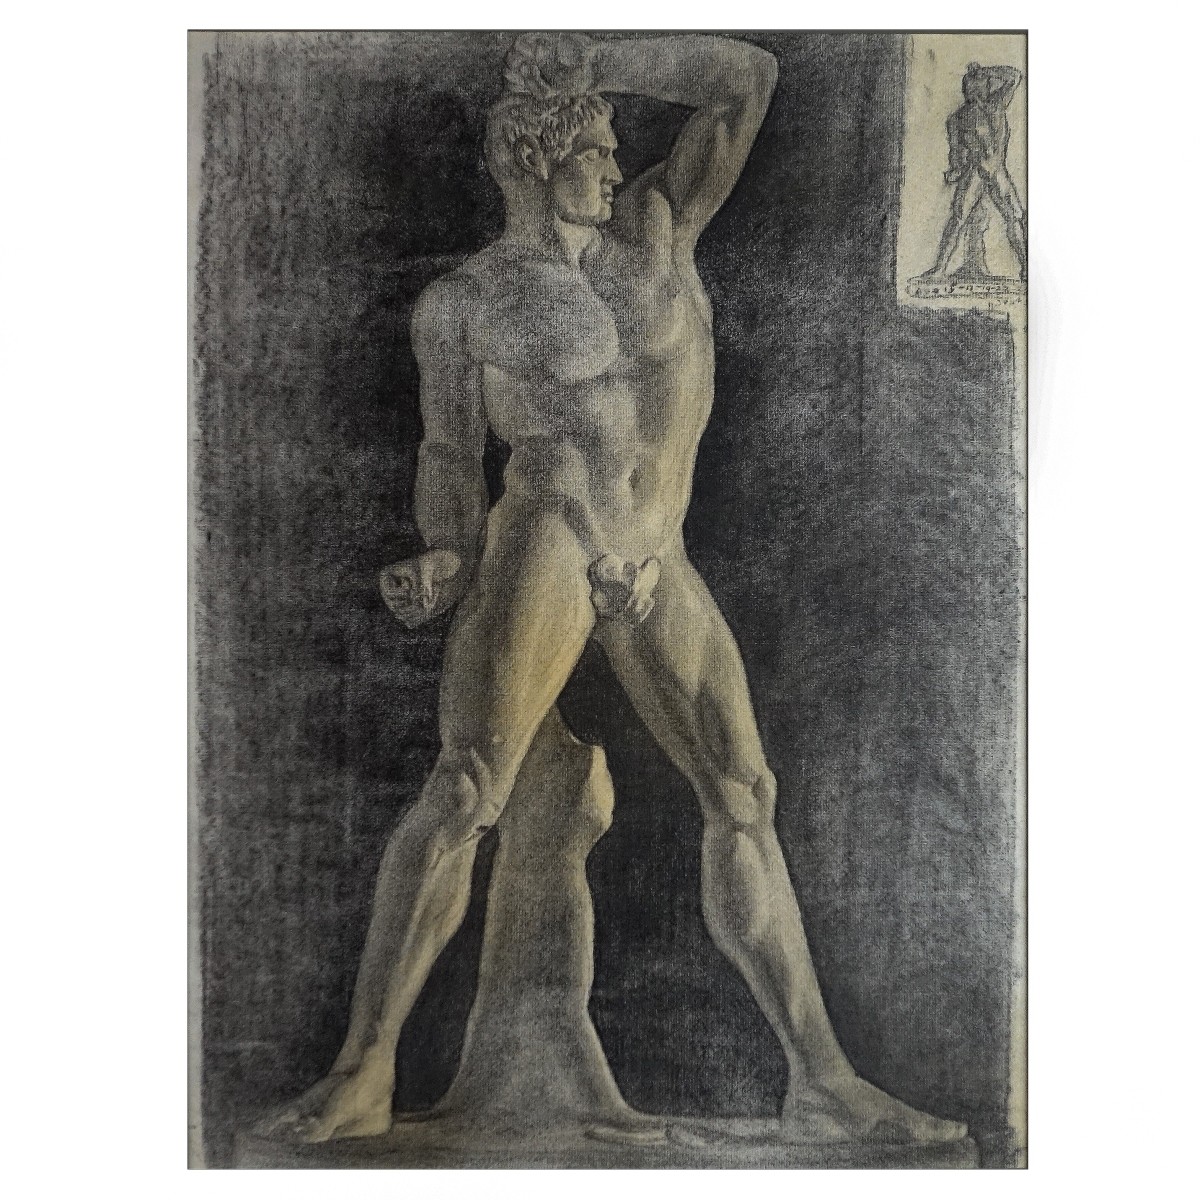 Neoclassical style Charcoal Drawing